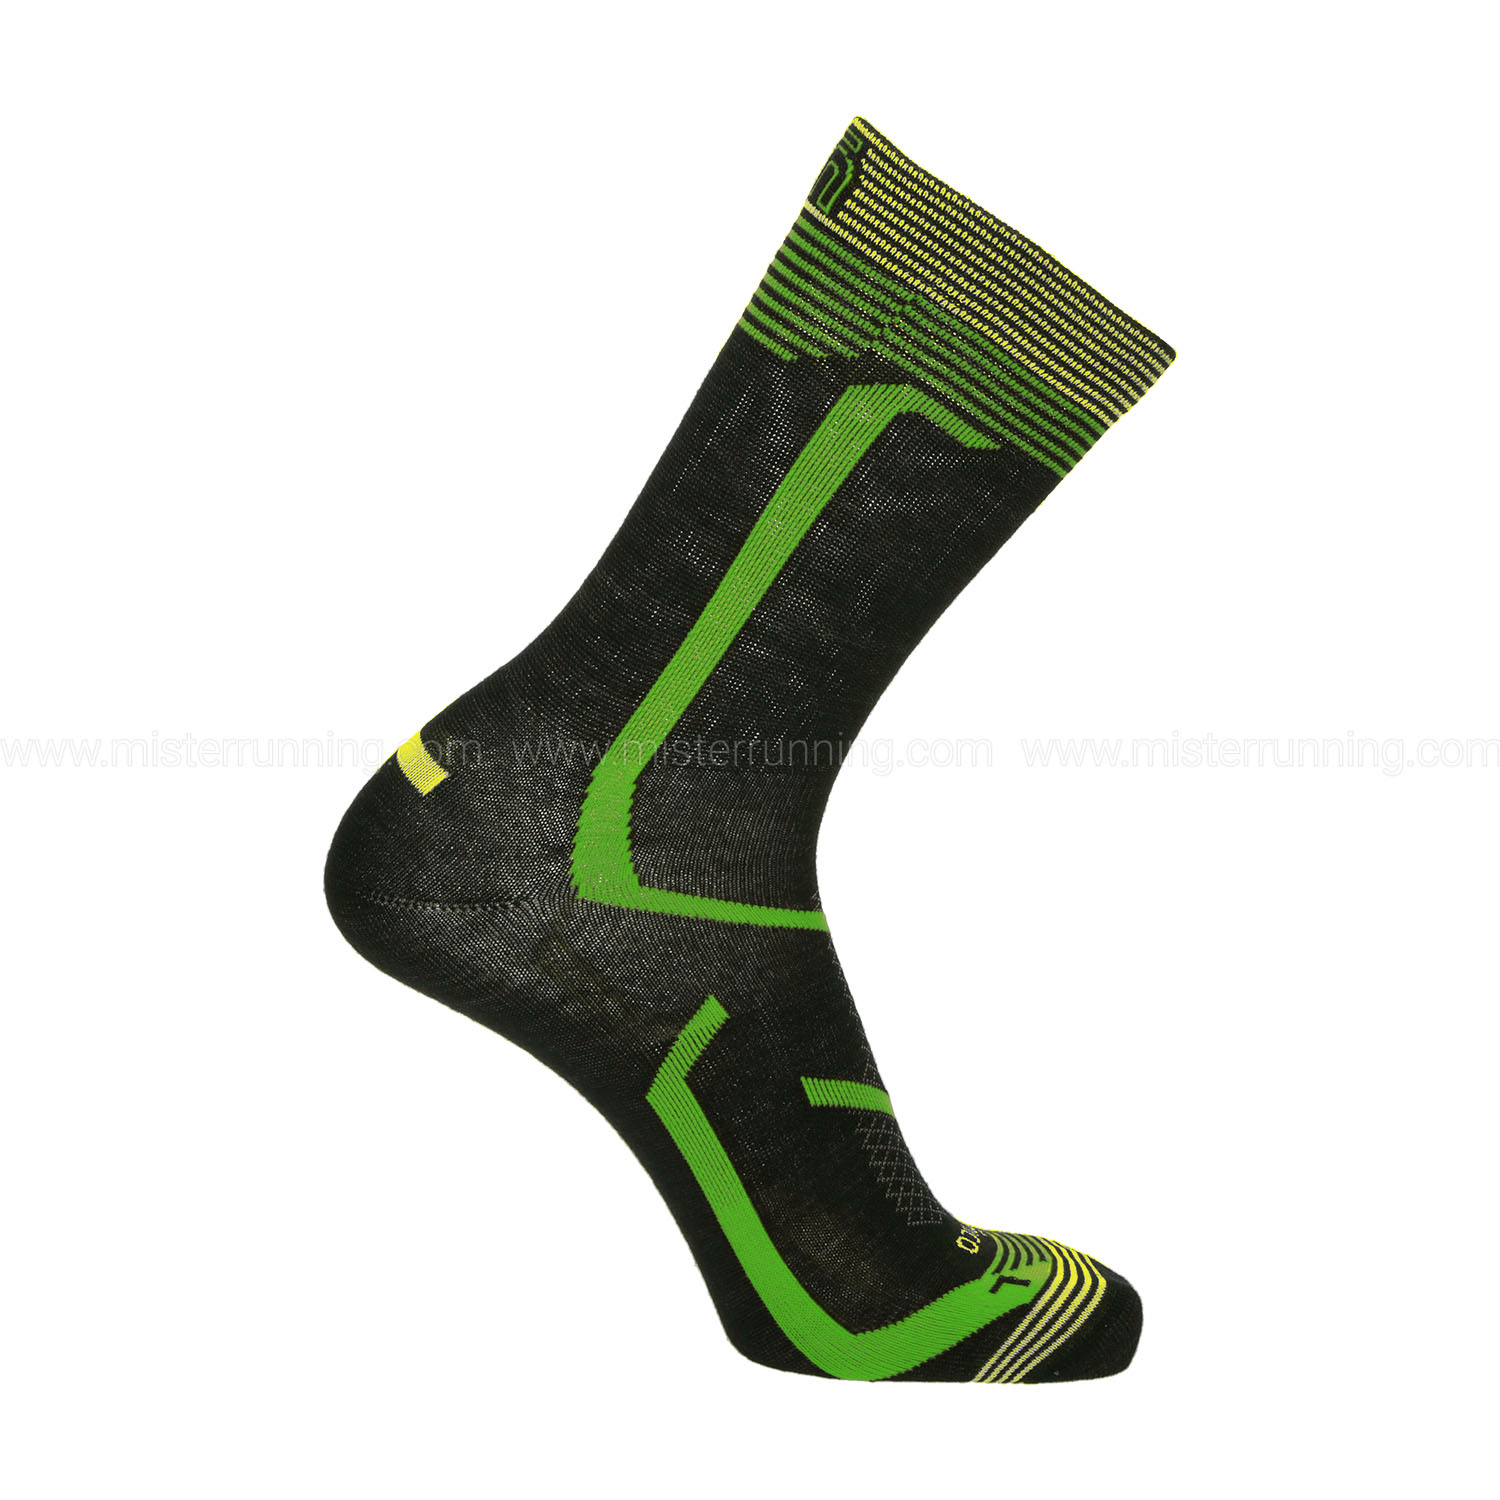 Mico Warm Control Protech Light Weight Calcetines - Nero/Giallo Fluo